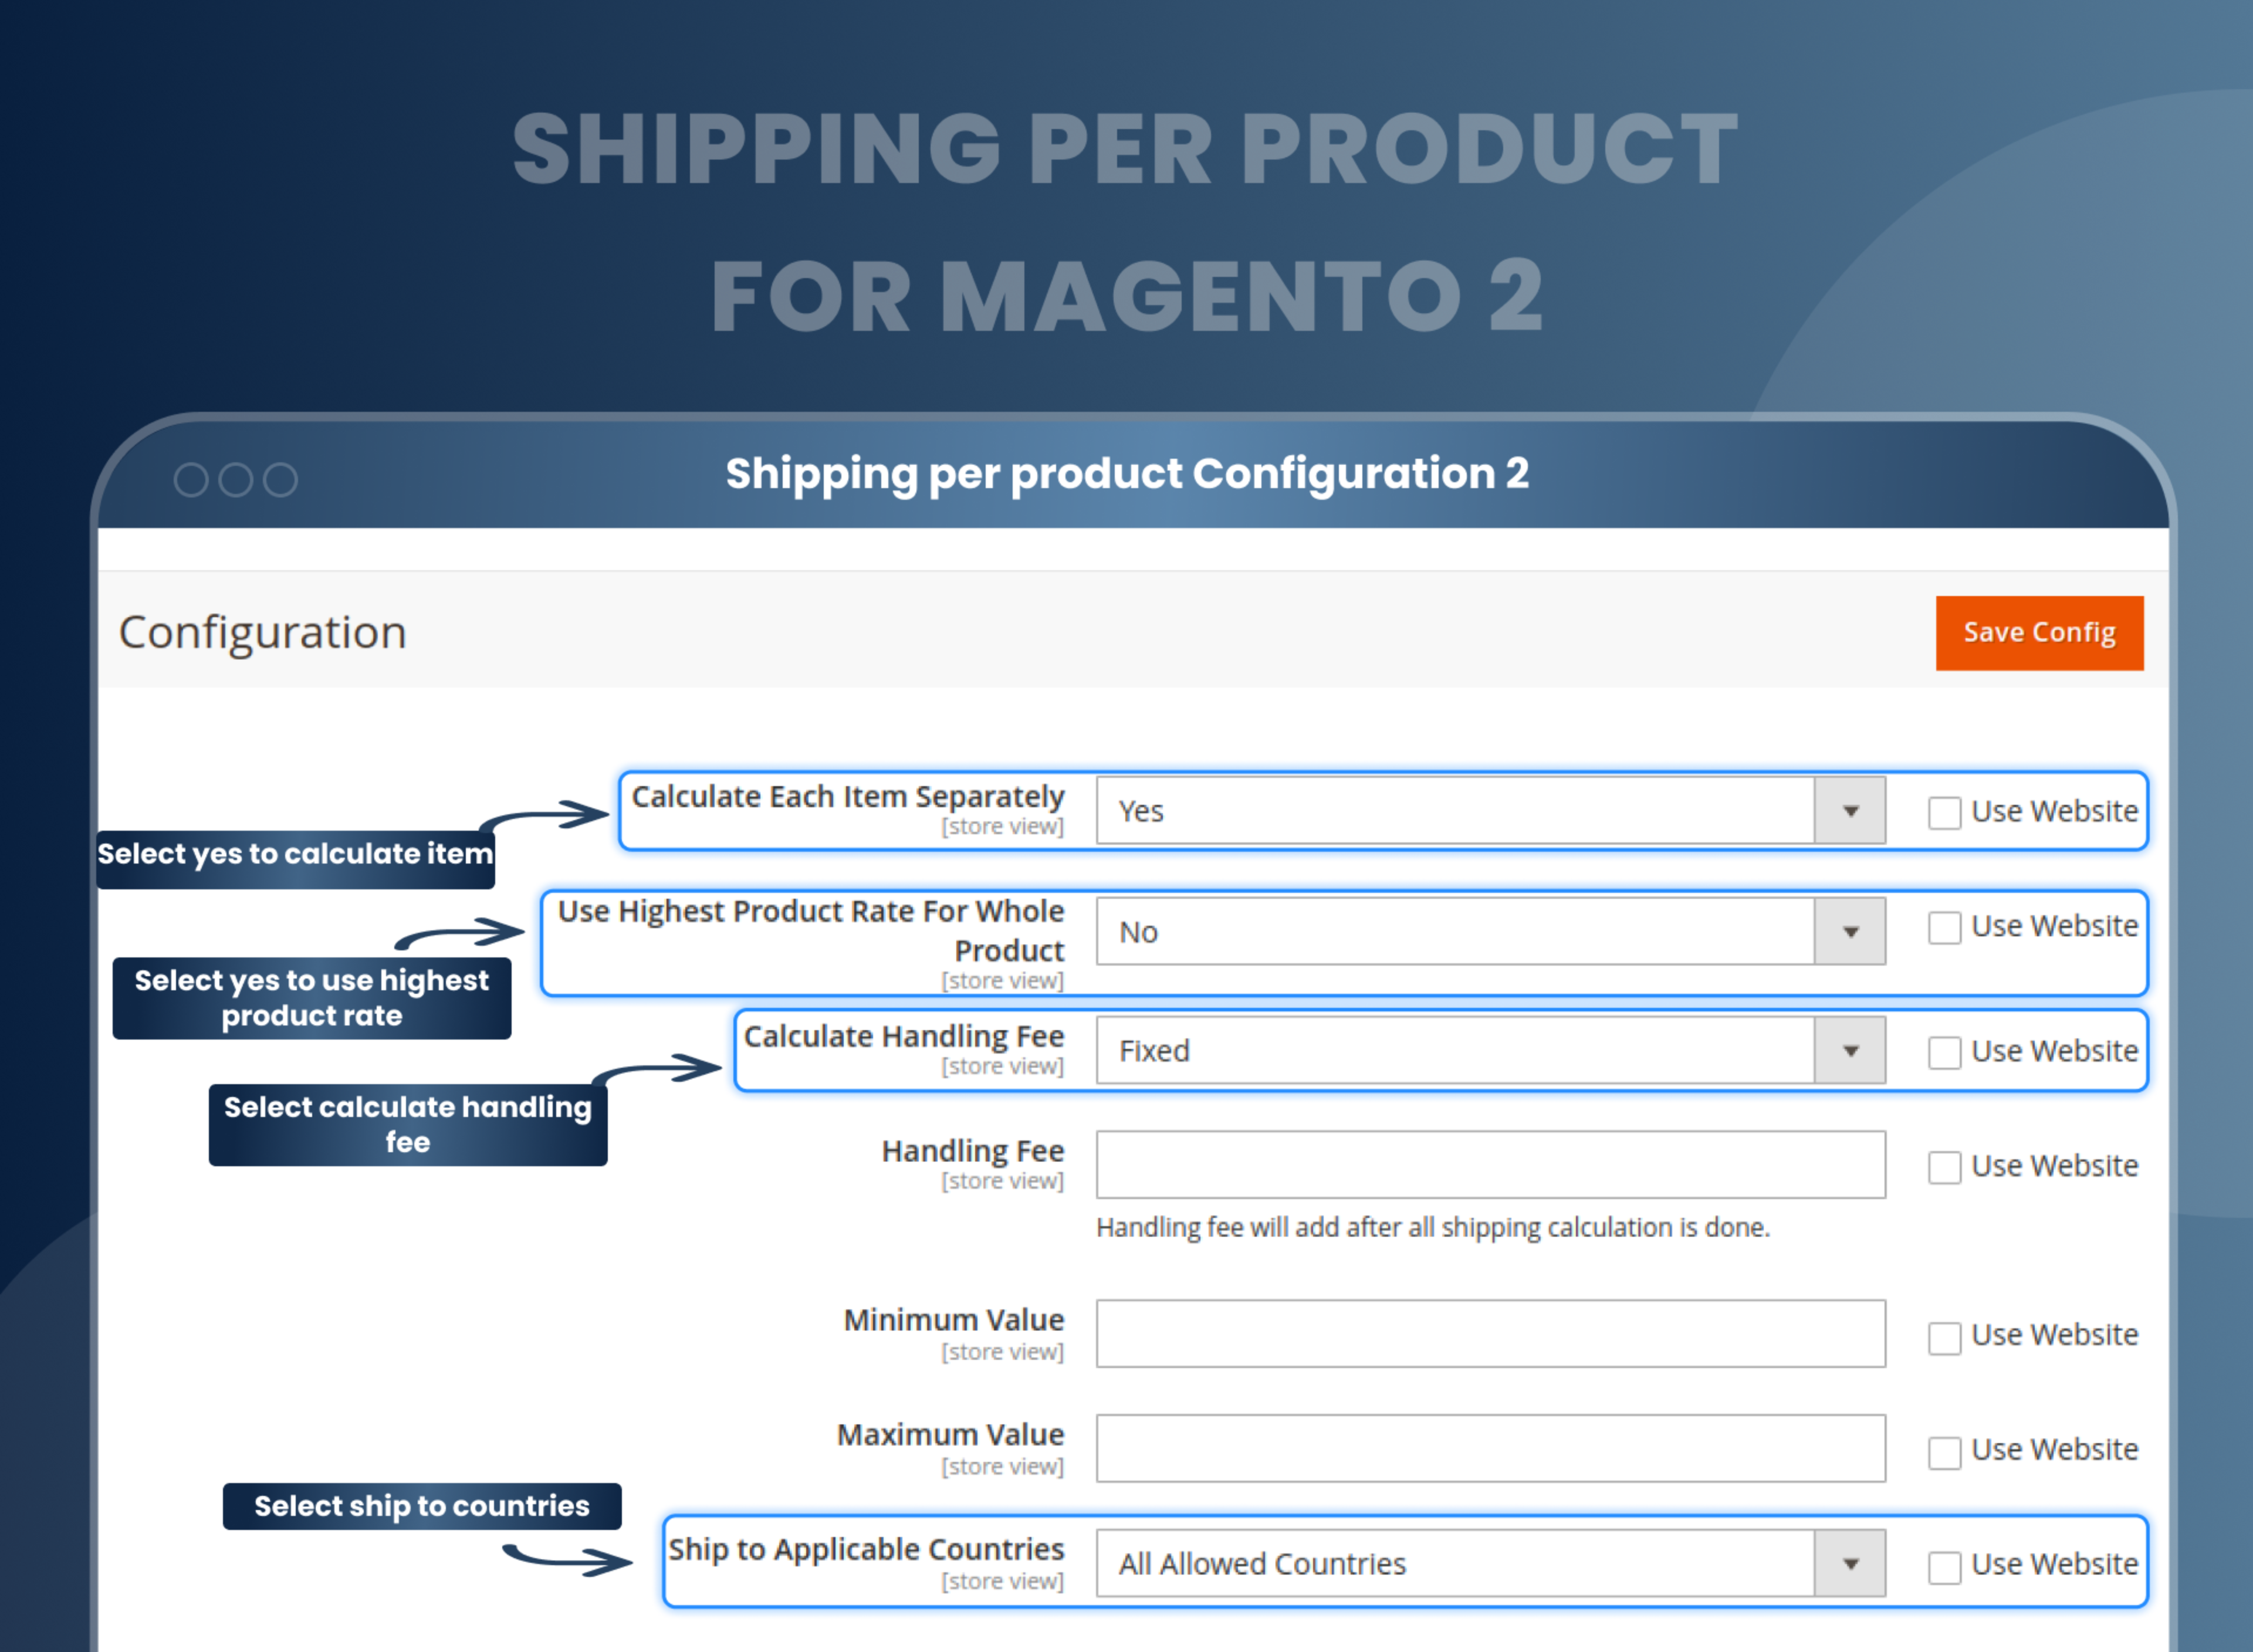 Shipping per product Configuration 2